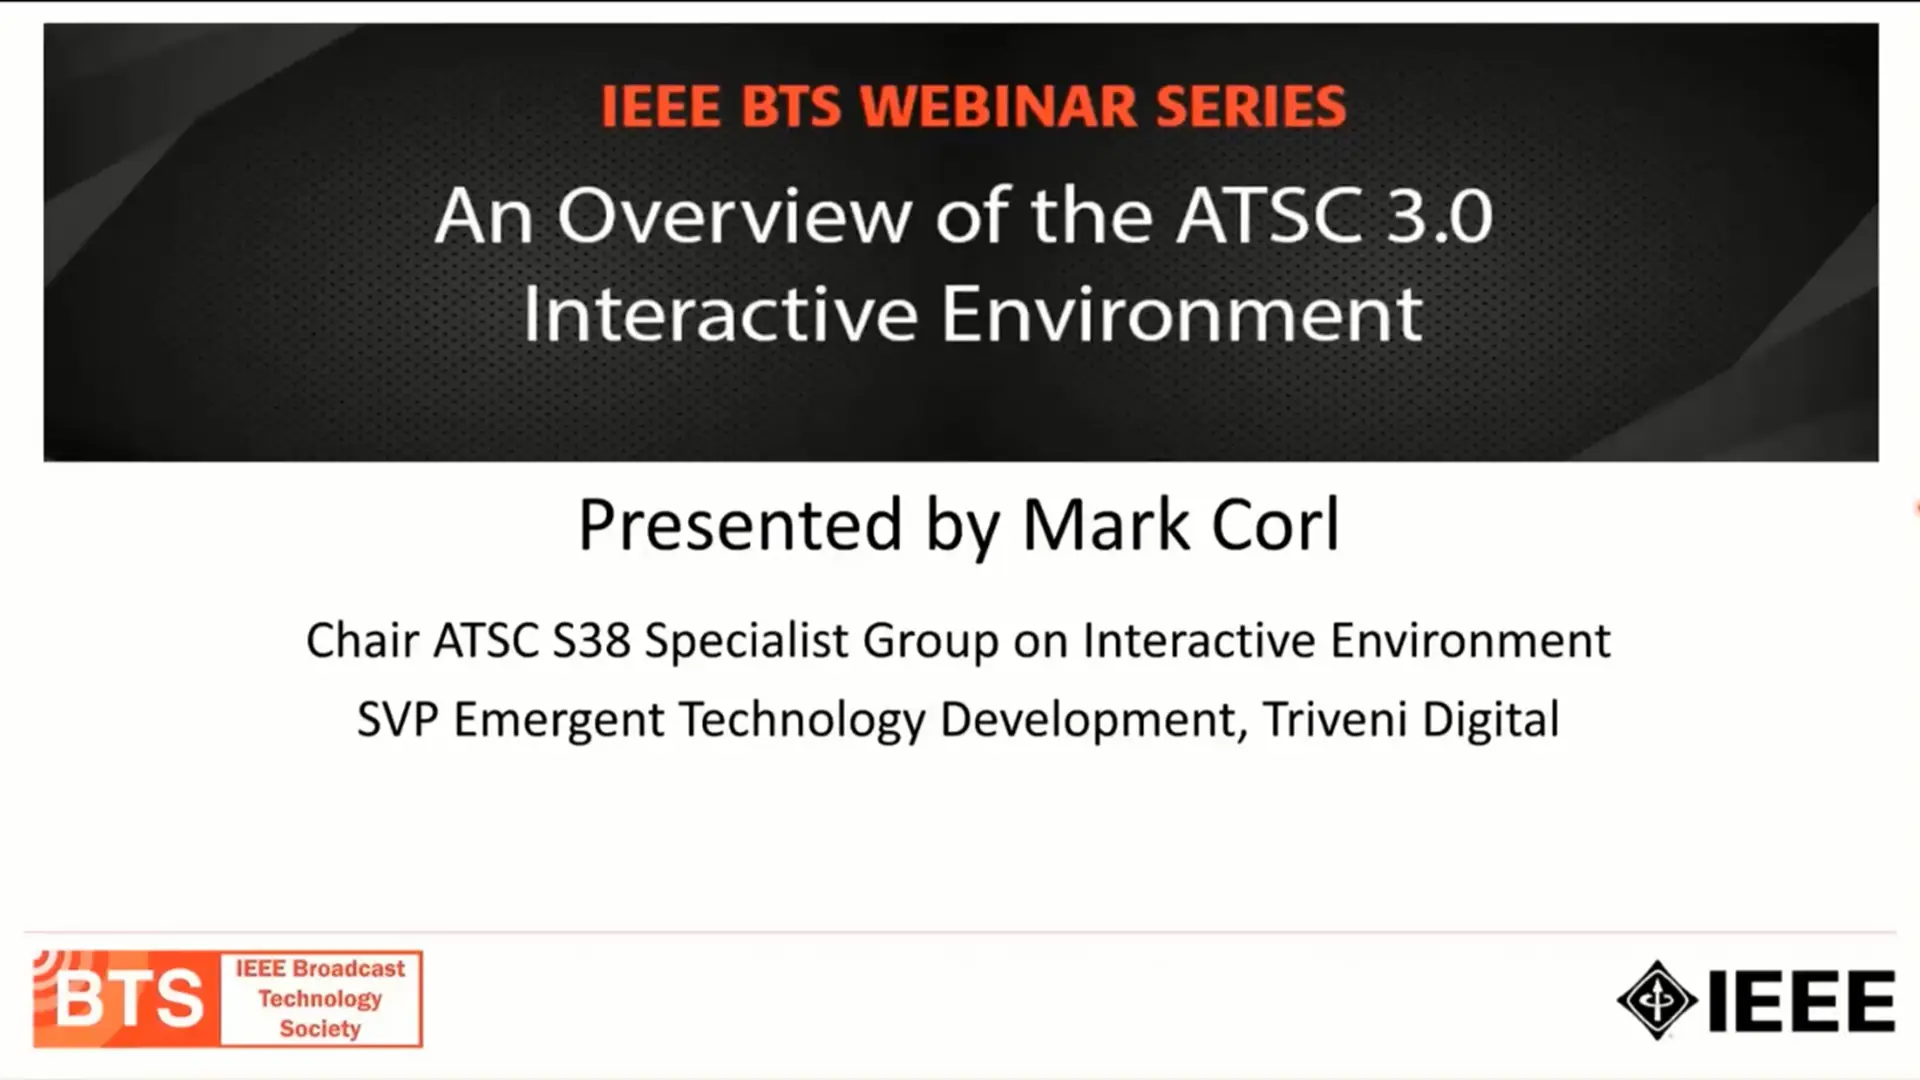 An Overview of the ATSC 3.0 Interactive Environment